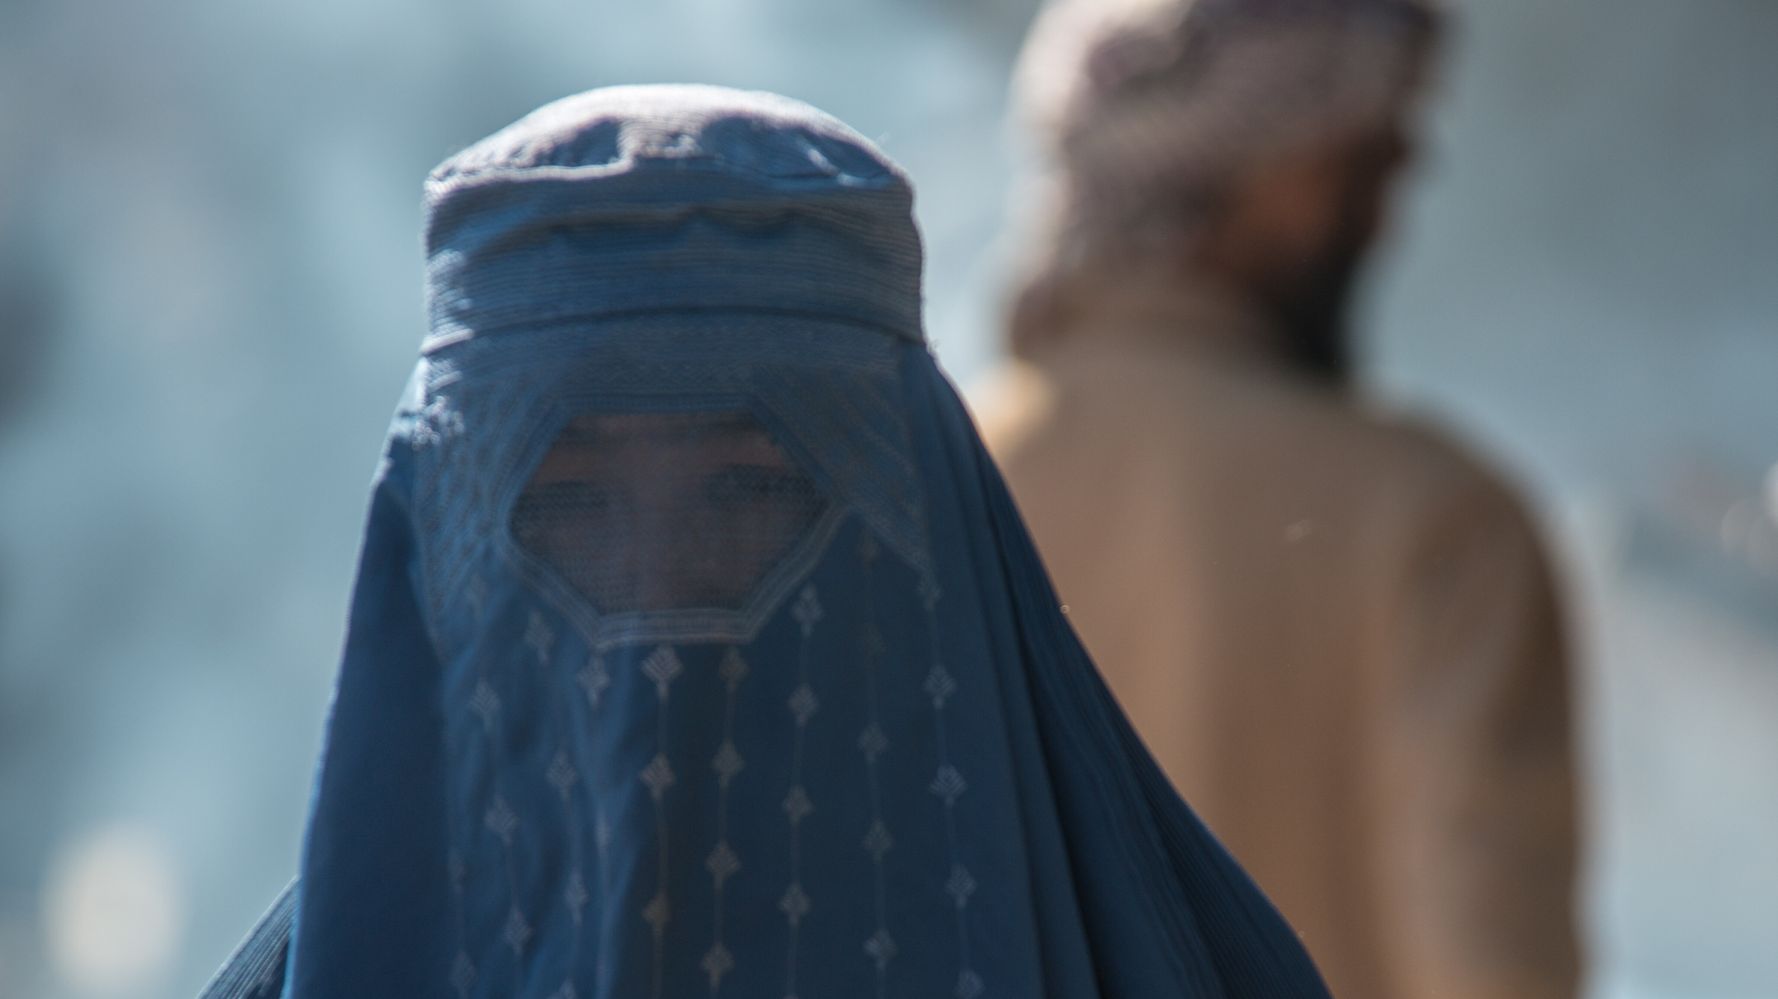 Taliban Bans Mixed Gender University Classes In Afghanistan